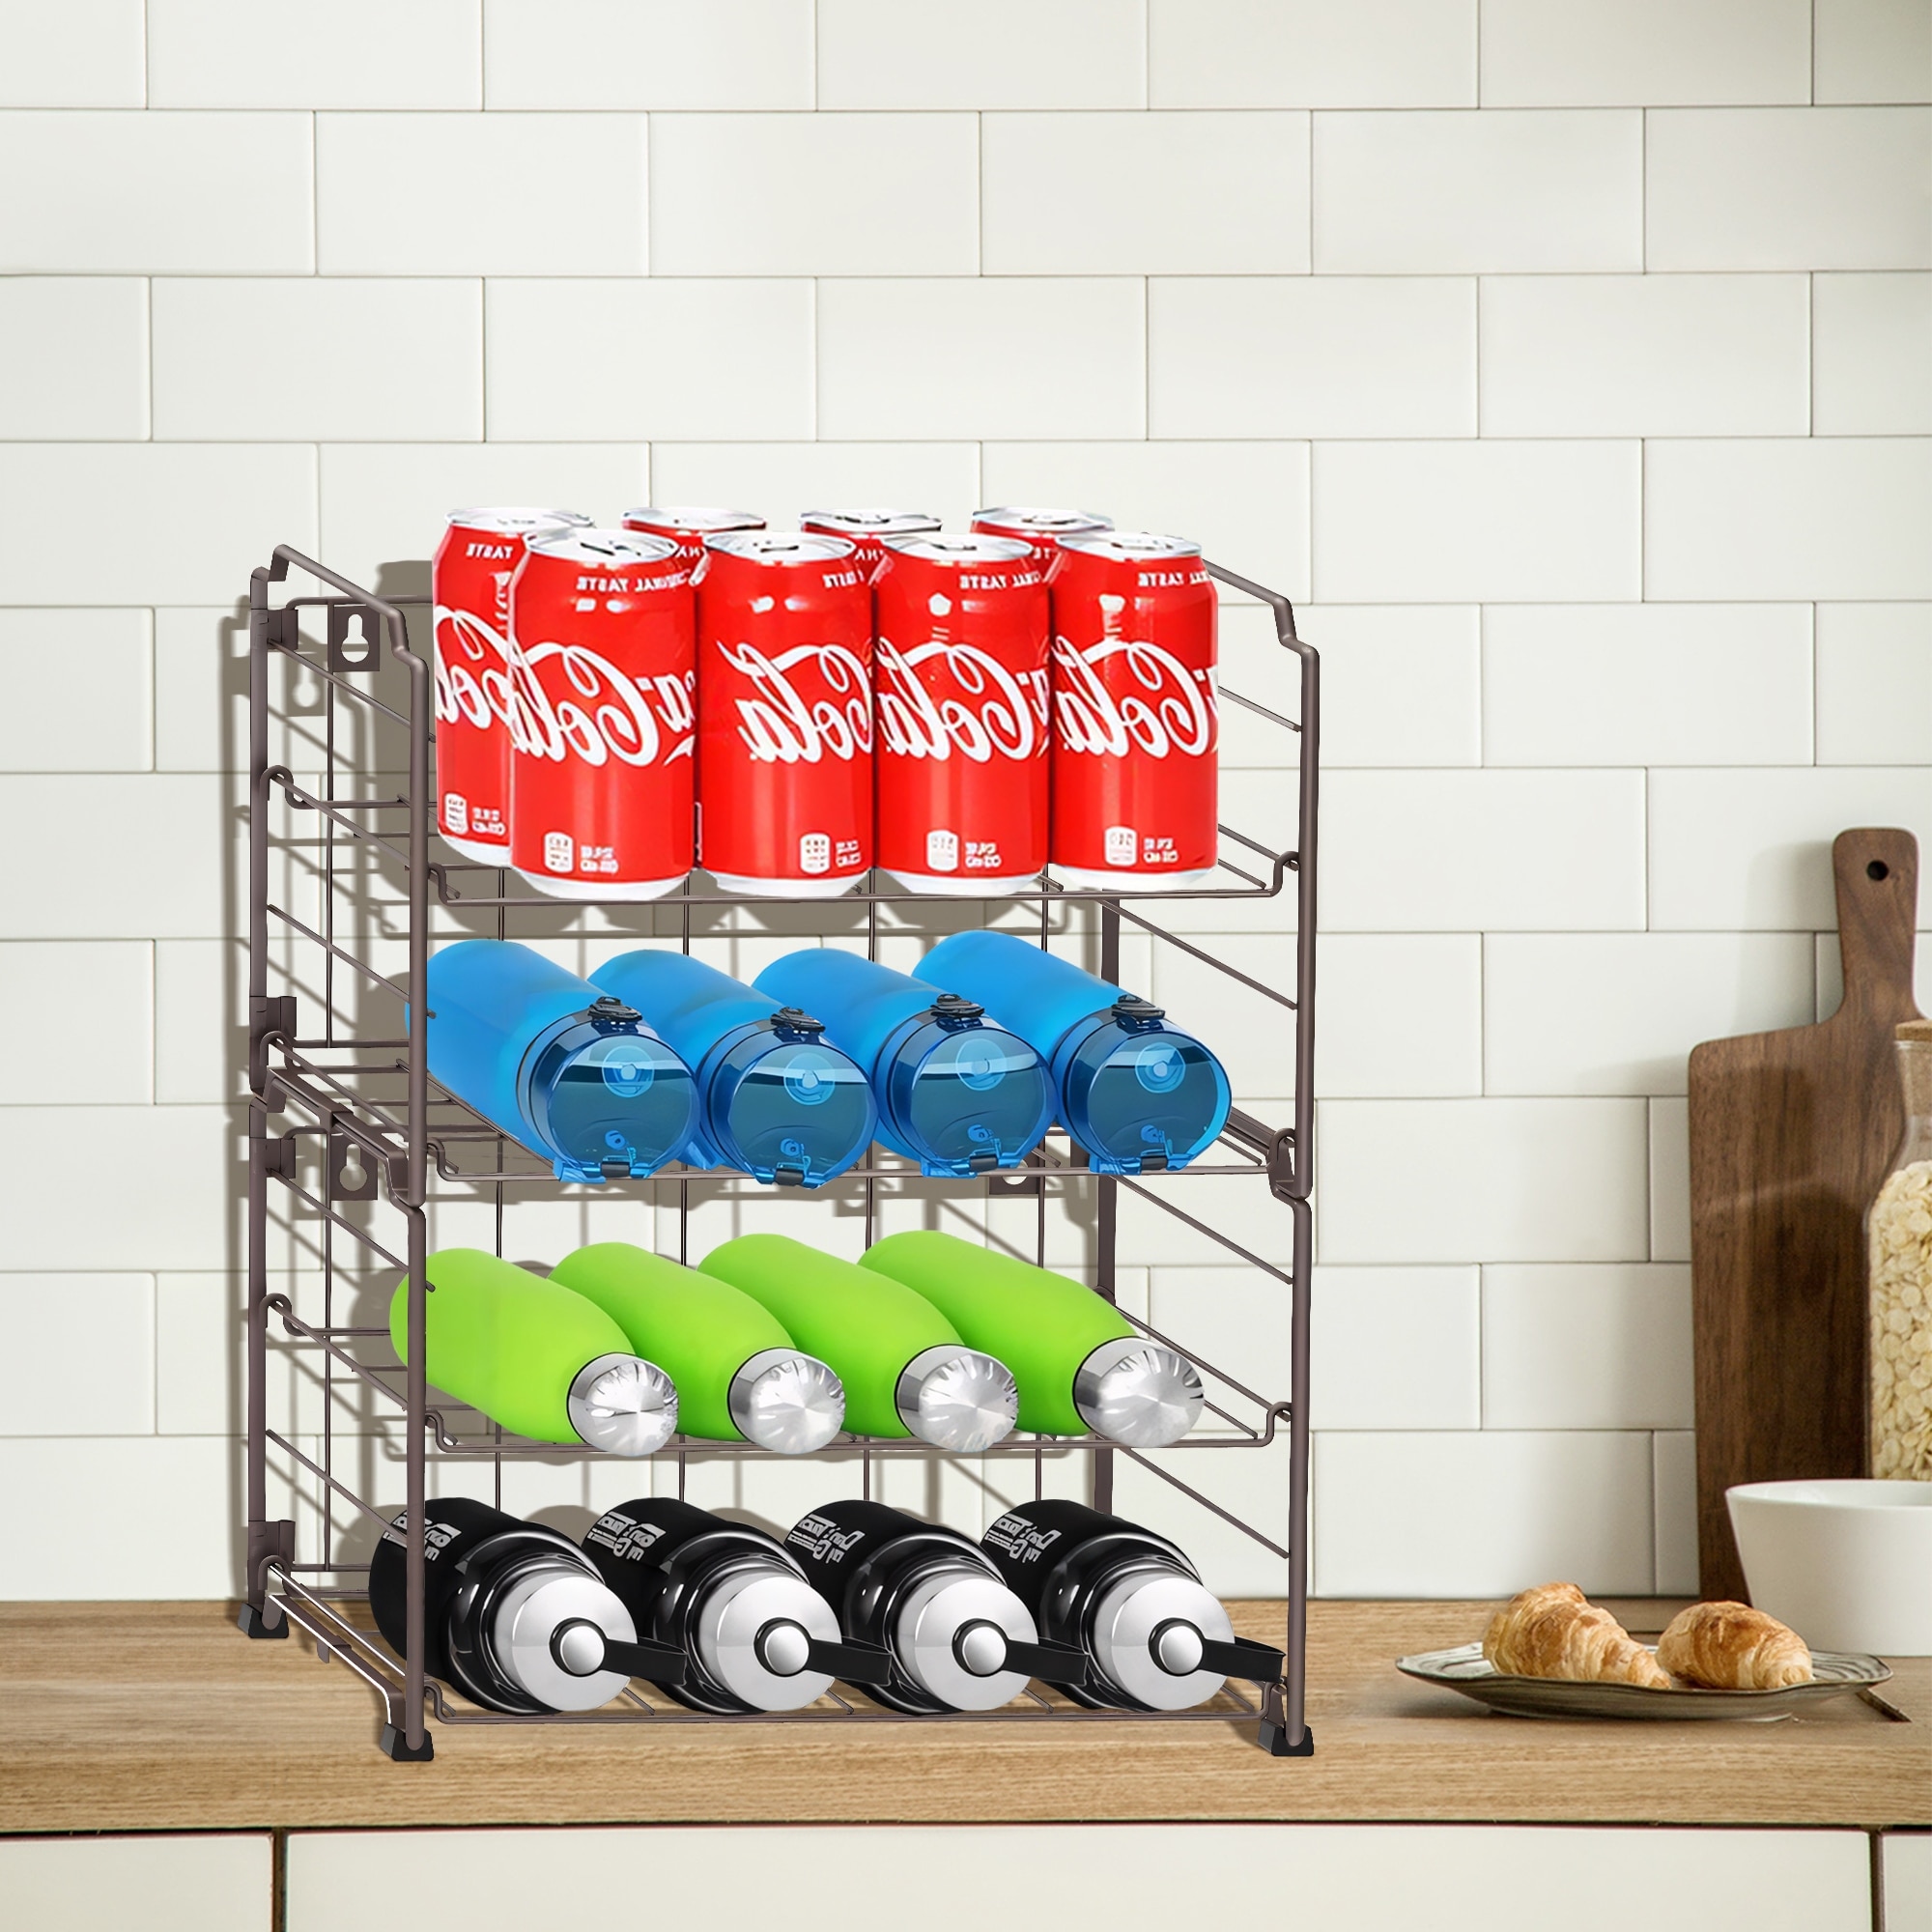 https://ak1.ostkcdn.com/images/products/is/images/direct/1cc253e3dd5dbec836602be9c0b4880225a966f8/Stackable-Freestanding-Water-Bottle-Storage-Rack-%282-Pack%29.jpg